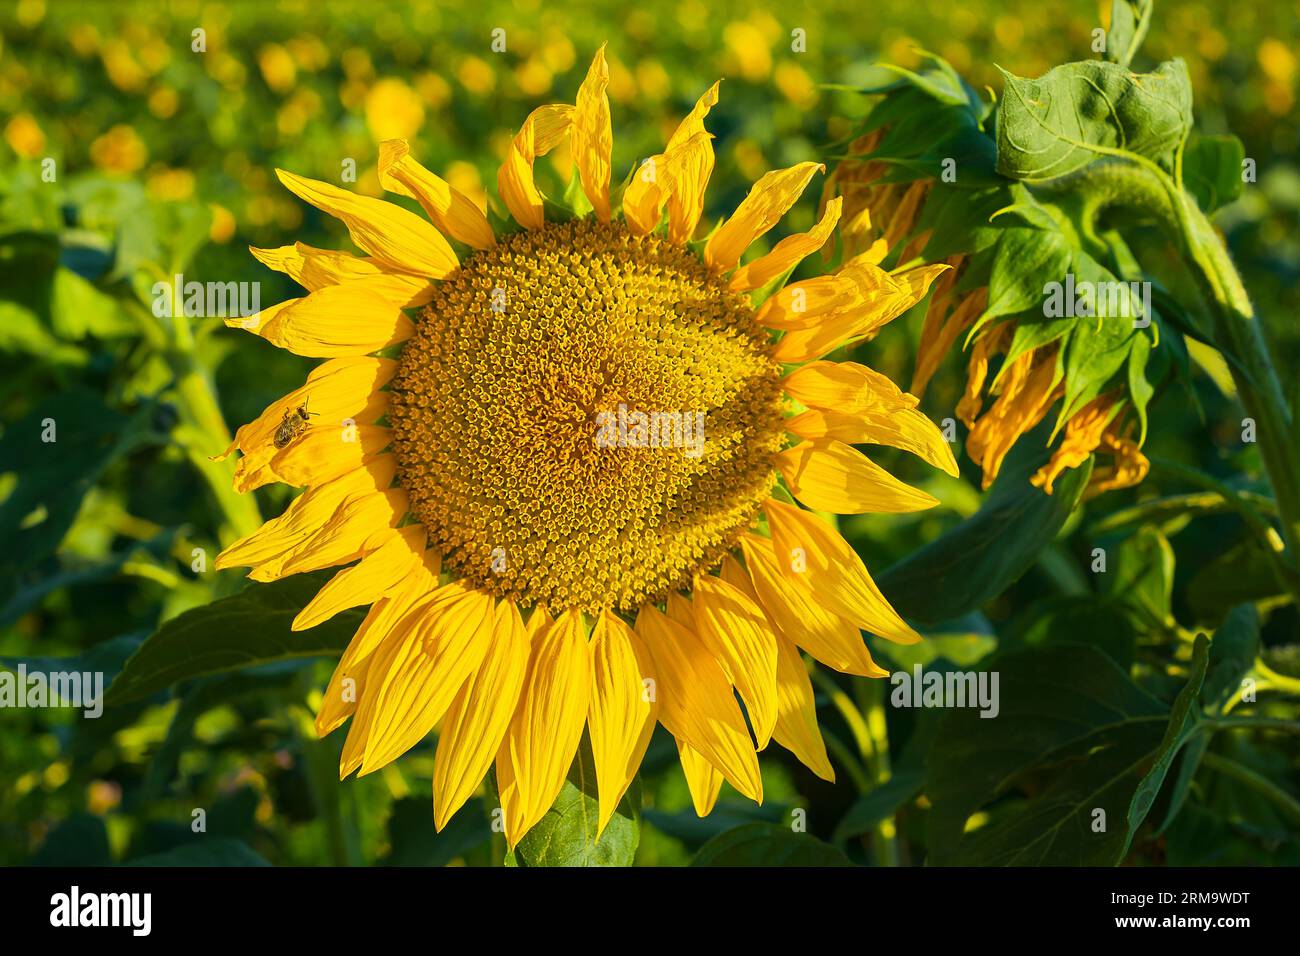 Ripening sunflower close up, sunflower field on eco farm, idea for web banner, selective focus on sunflower Stock Photo